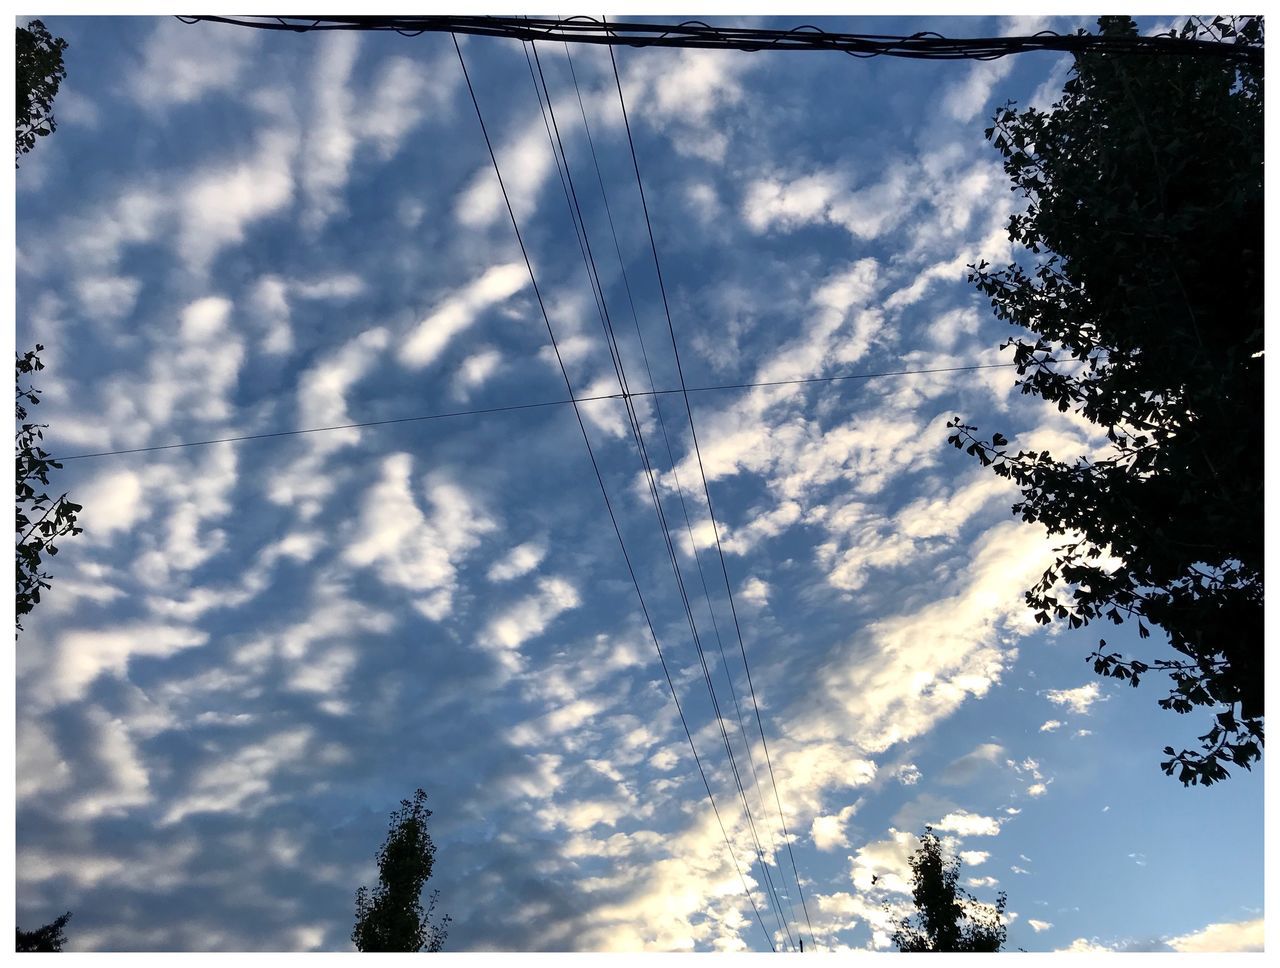 low angle view, cable, sky, power line, power supply, cloud - sky, tree, electricity pylon, electricity, nature, silhouette, no people, outdoors, beauty in nature, sunlight, tranquility, day, scenics, vapor trail